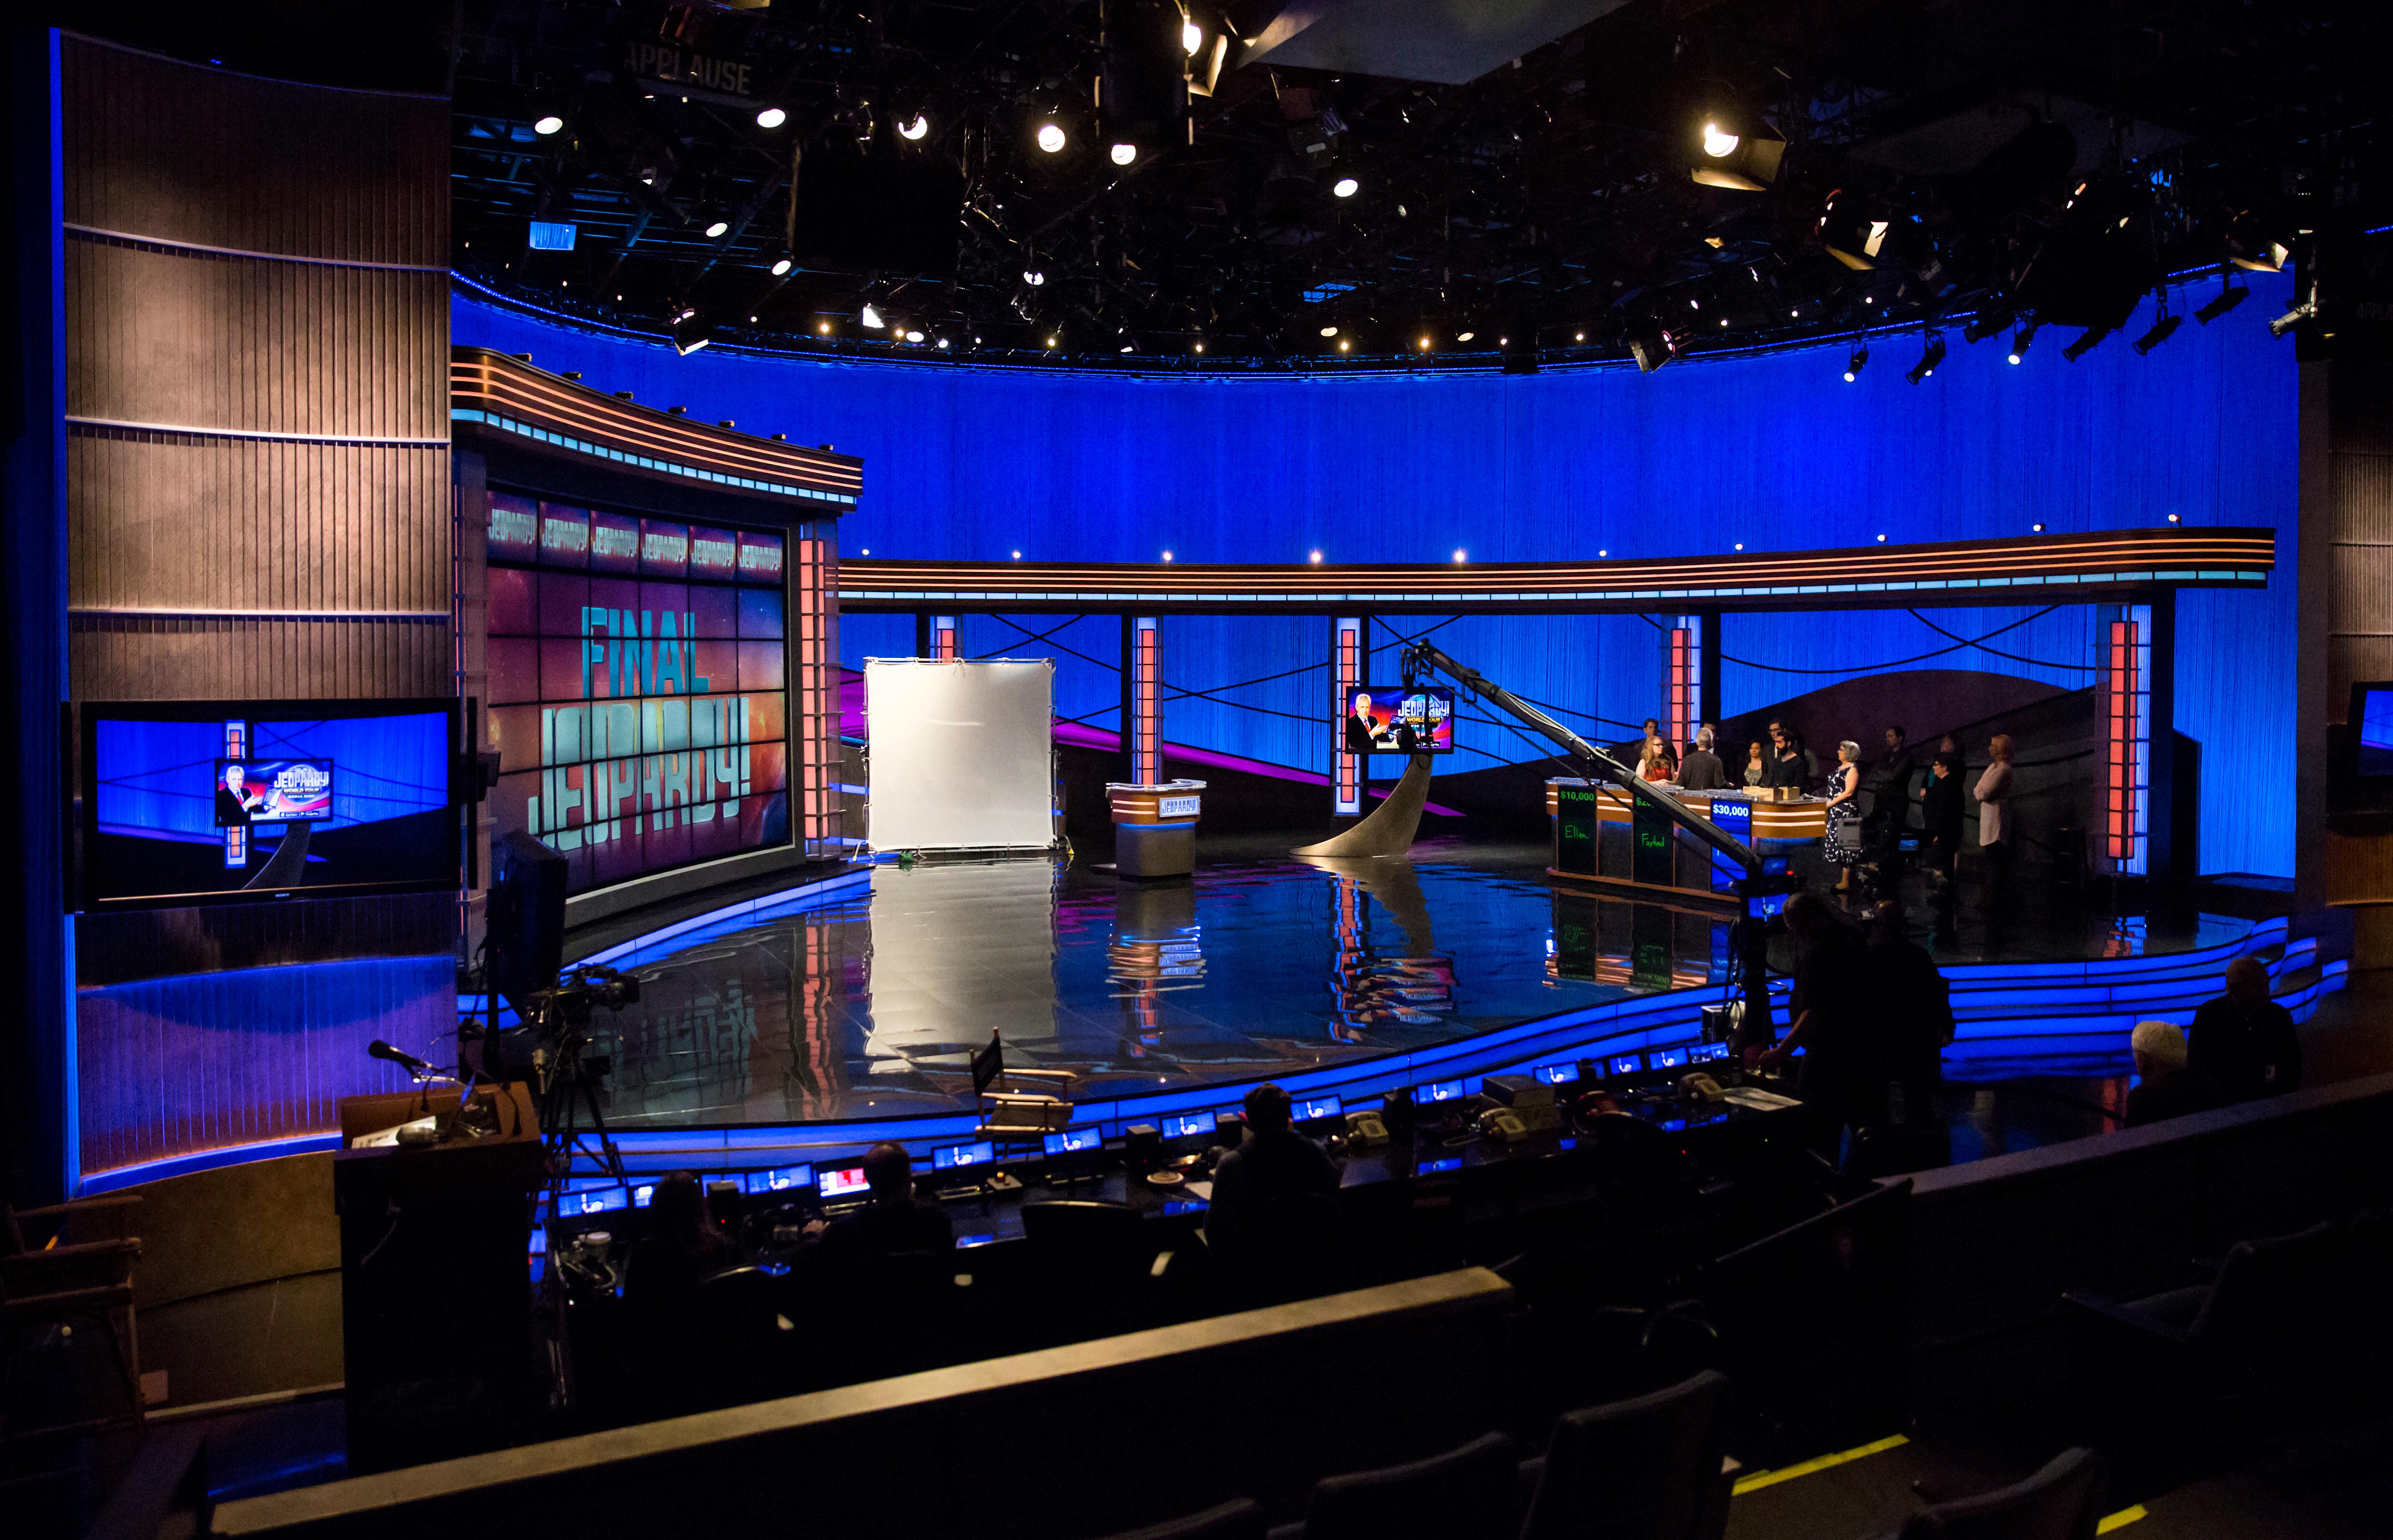 Photos Behindthescenes on the Jeopardy! set KPIC